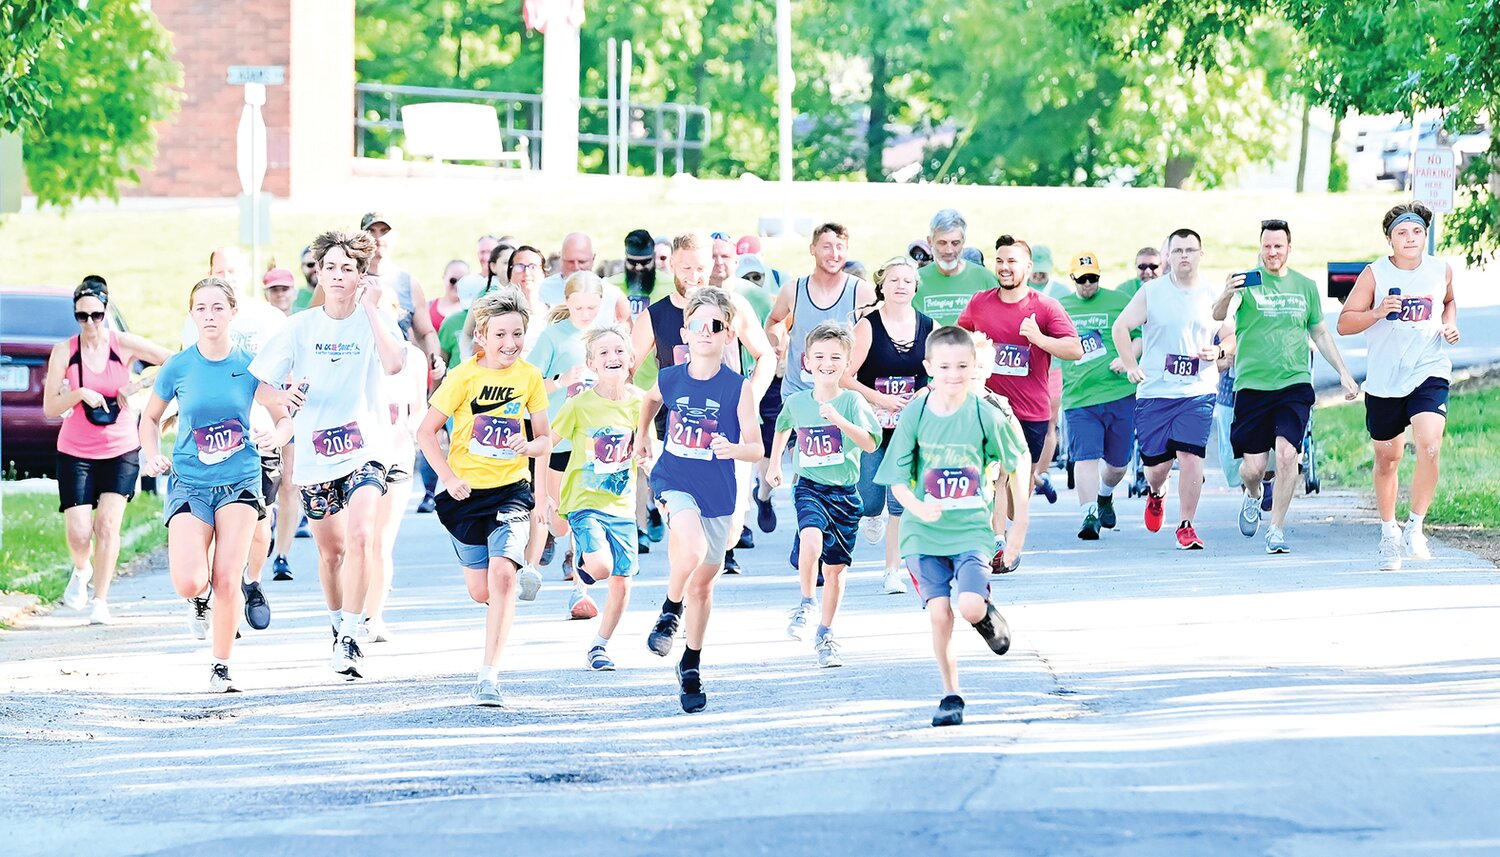 Saturday’s 5K Run/Walk to benefit Rescue Innocence drew 58 participants in the ongoing fight against human trafficking. This is the seventh time the event has been held at the Linn City Park.